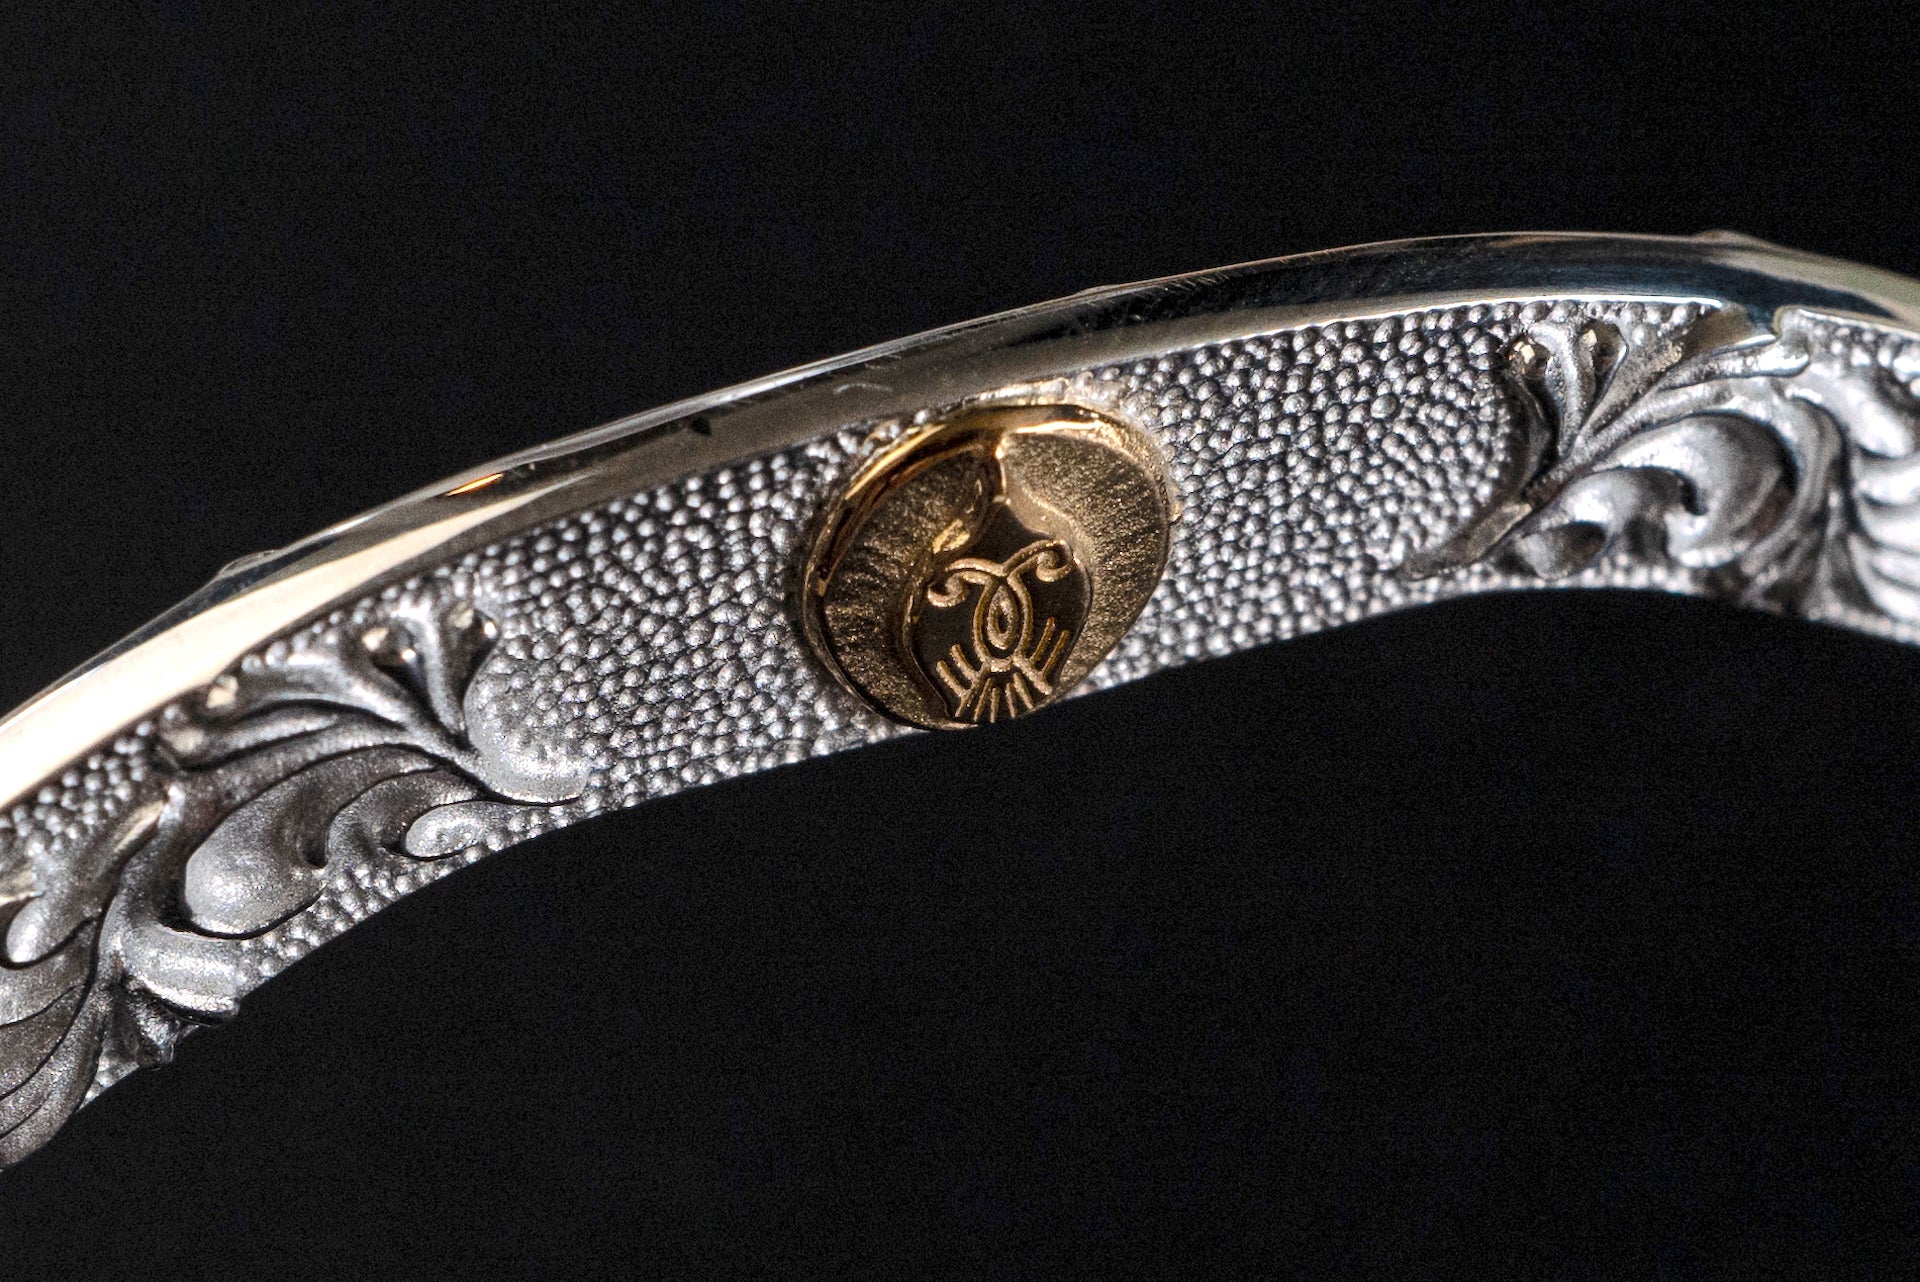 Legend 8mm "Double-Face" Silver Bangle with 22K Gold Emblem (B-113)